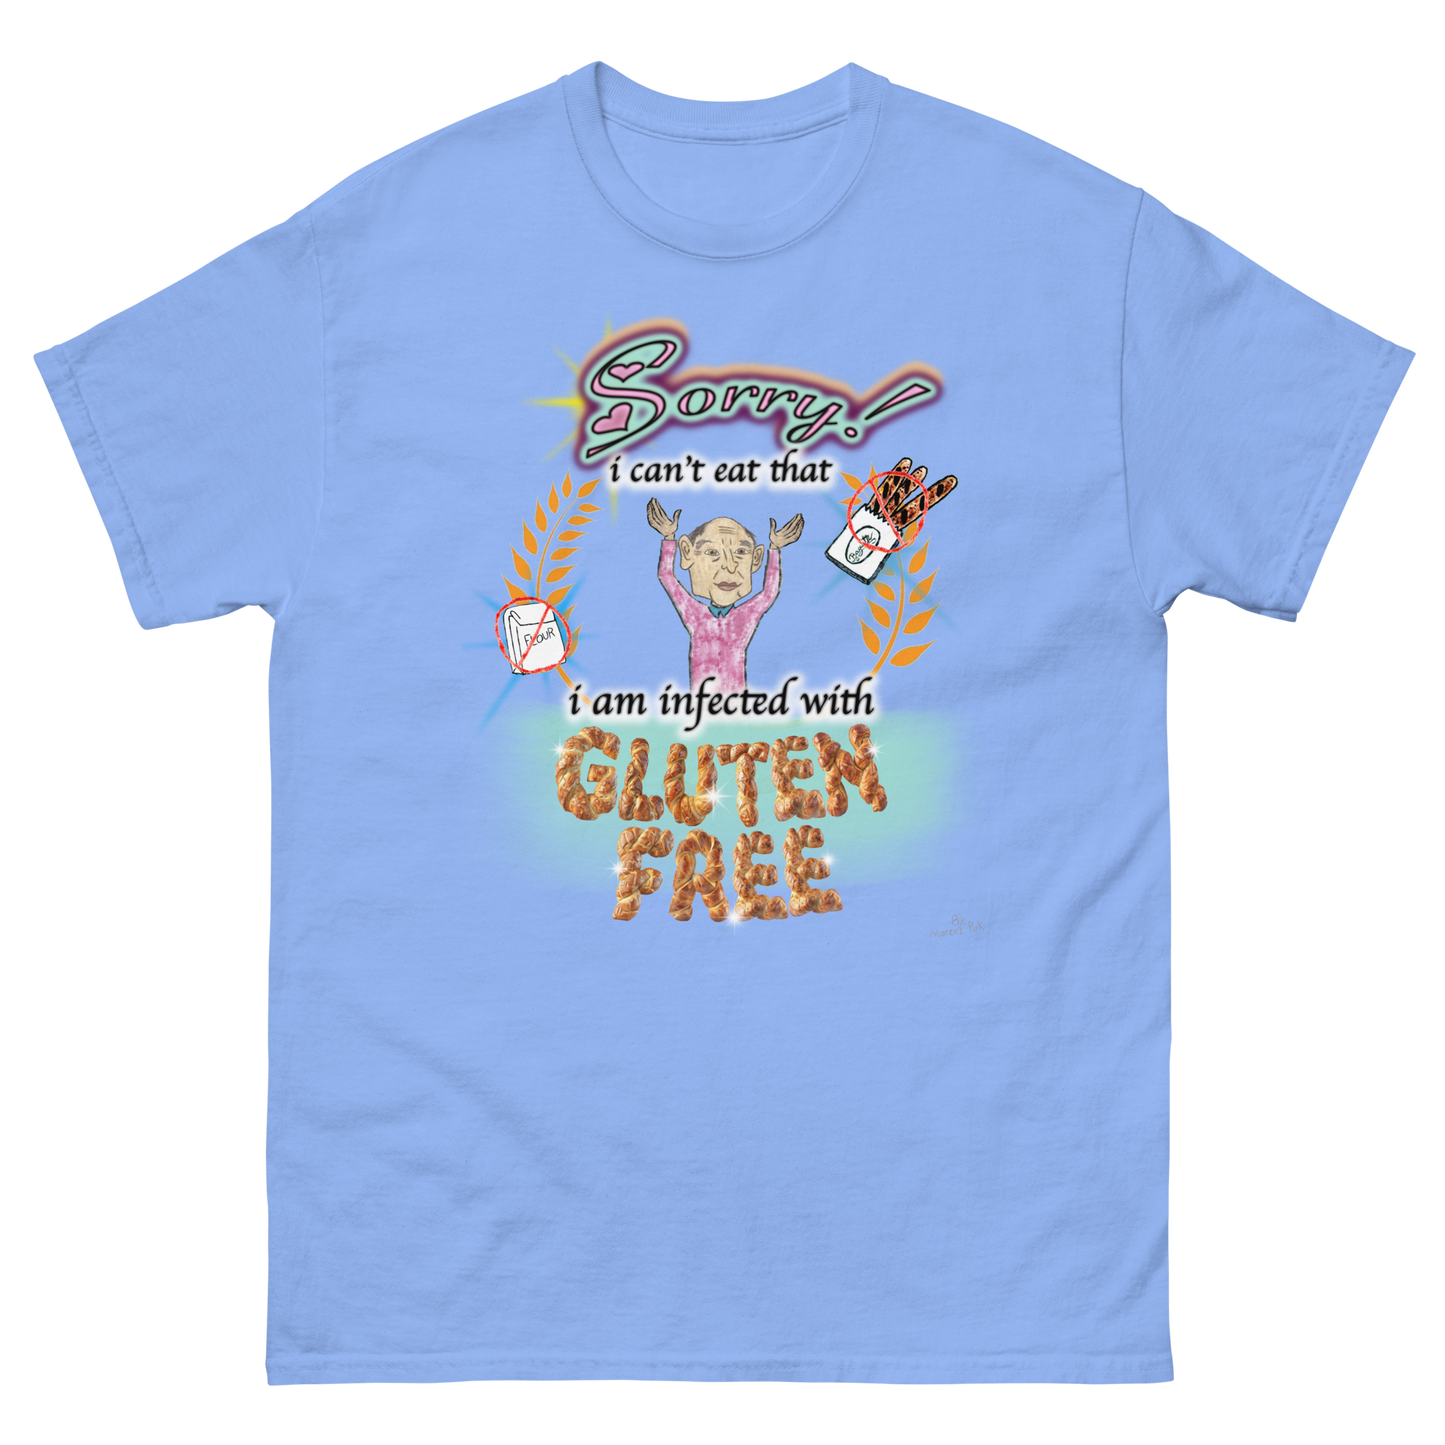 Infected with Gluten Free T-Shirt (Jr.'s Design)